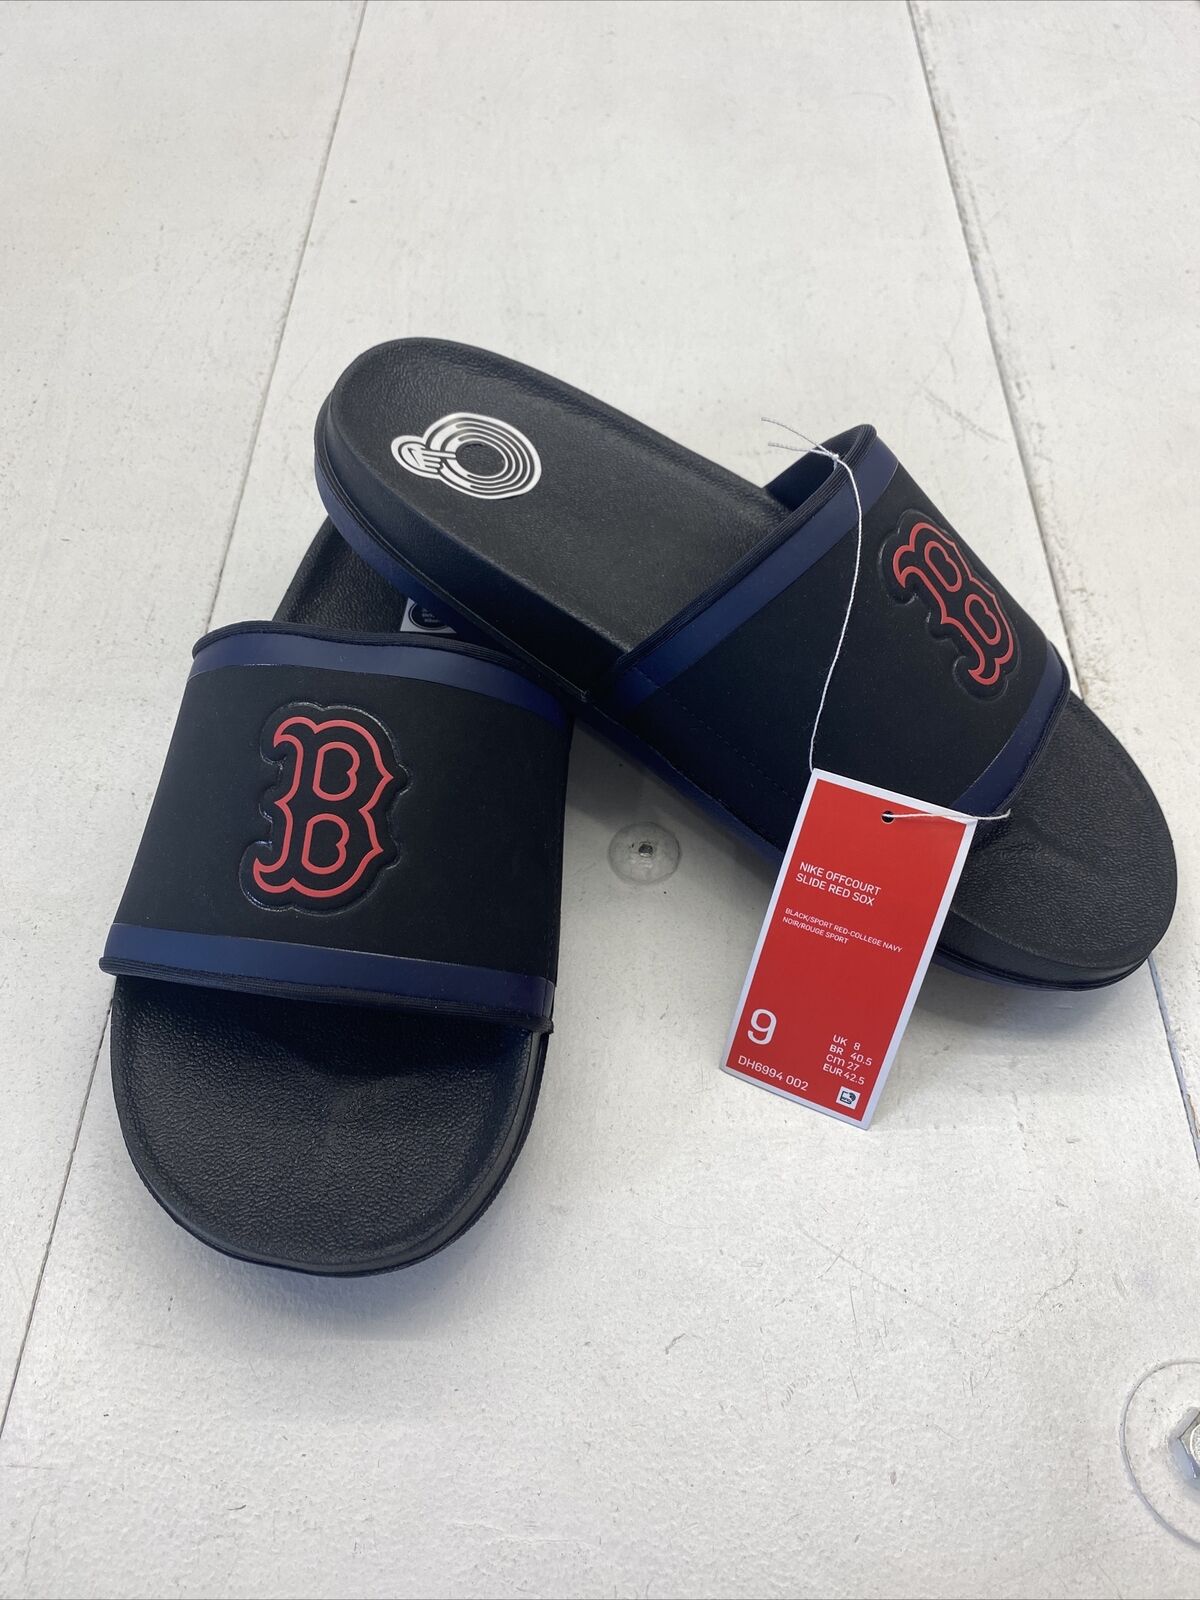 boston red sox nike shoes